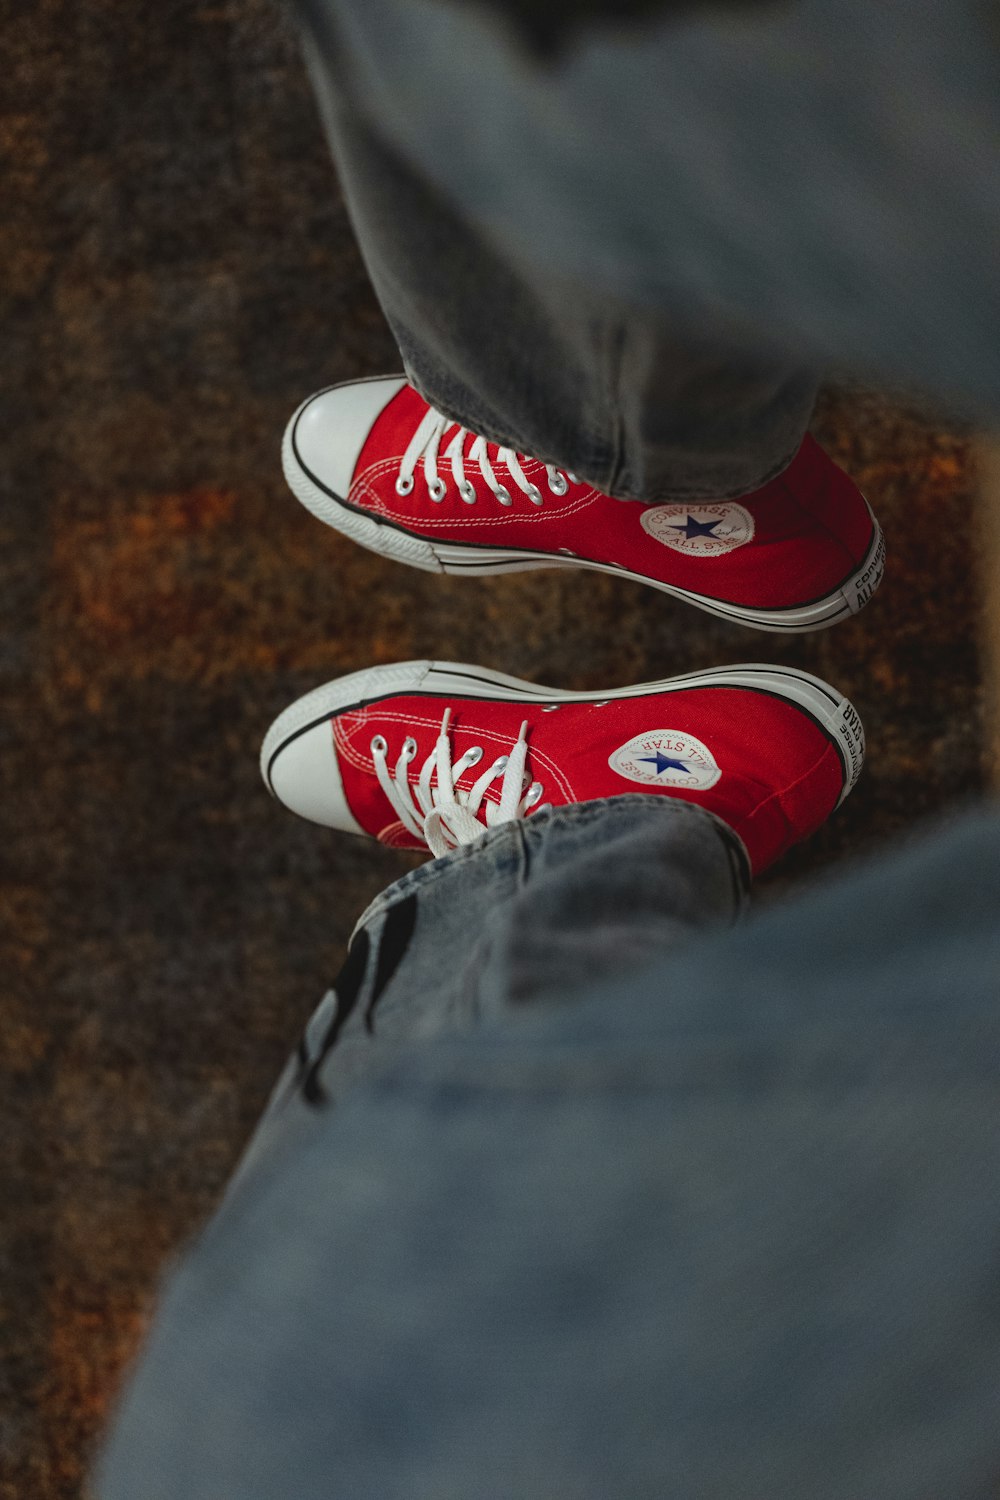 a pair of red shoes with white laces